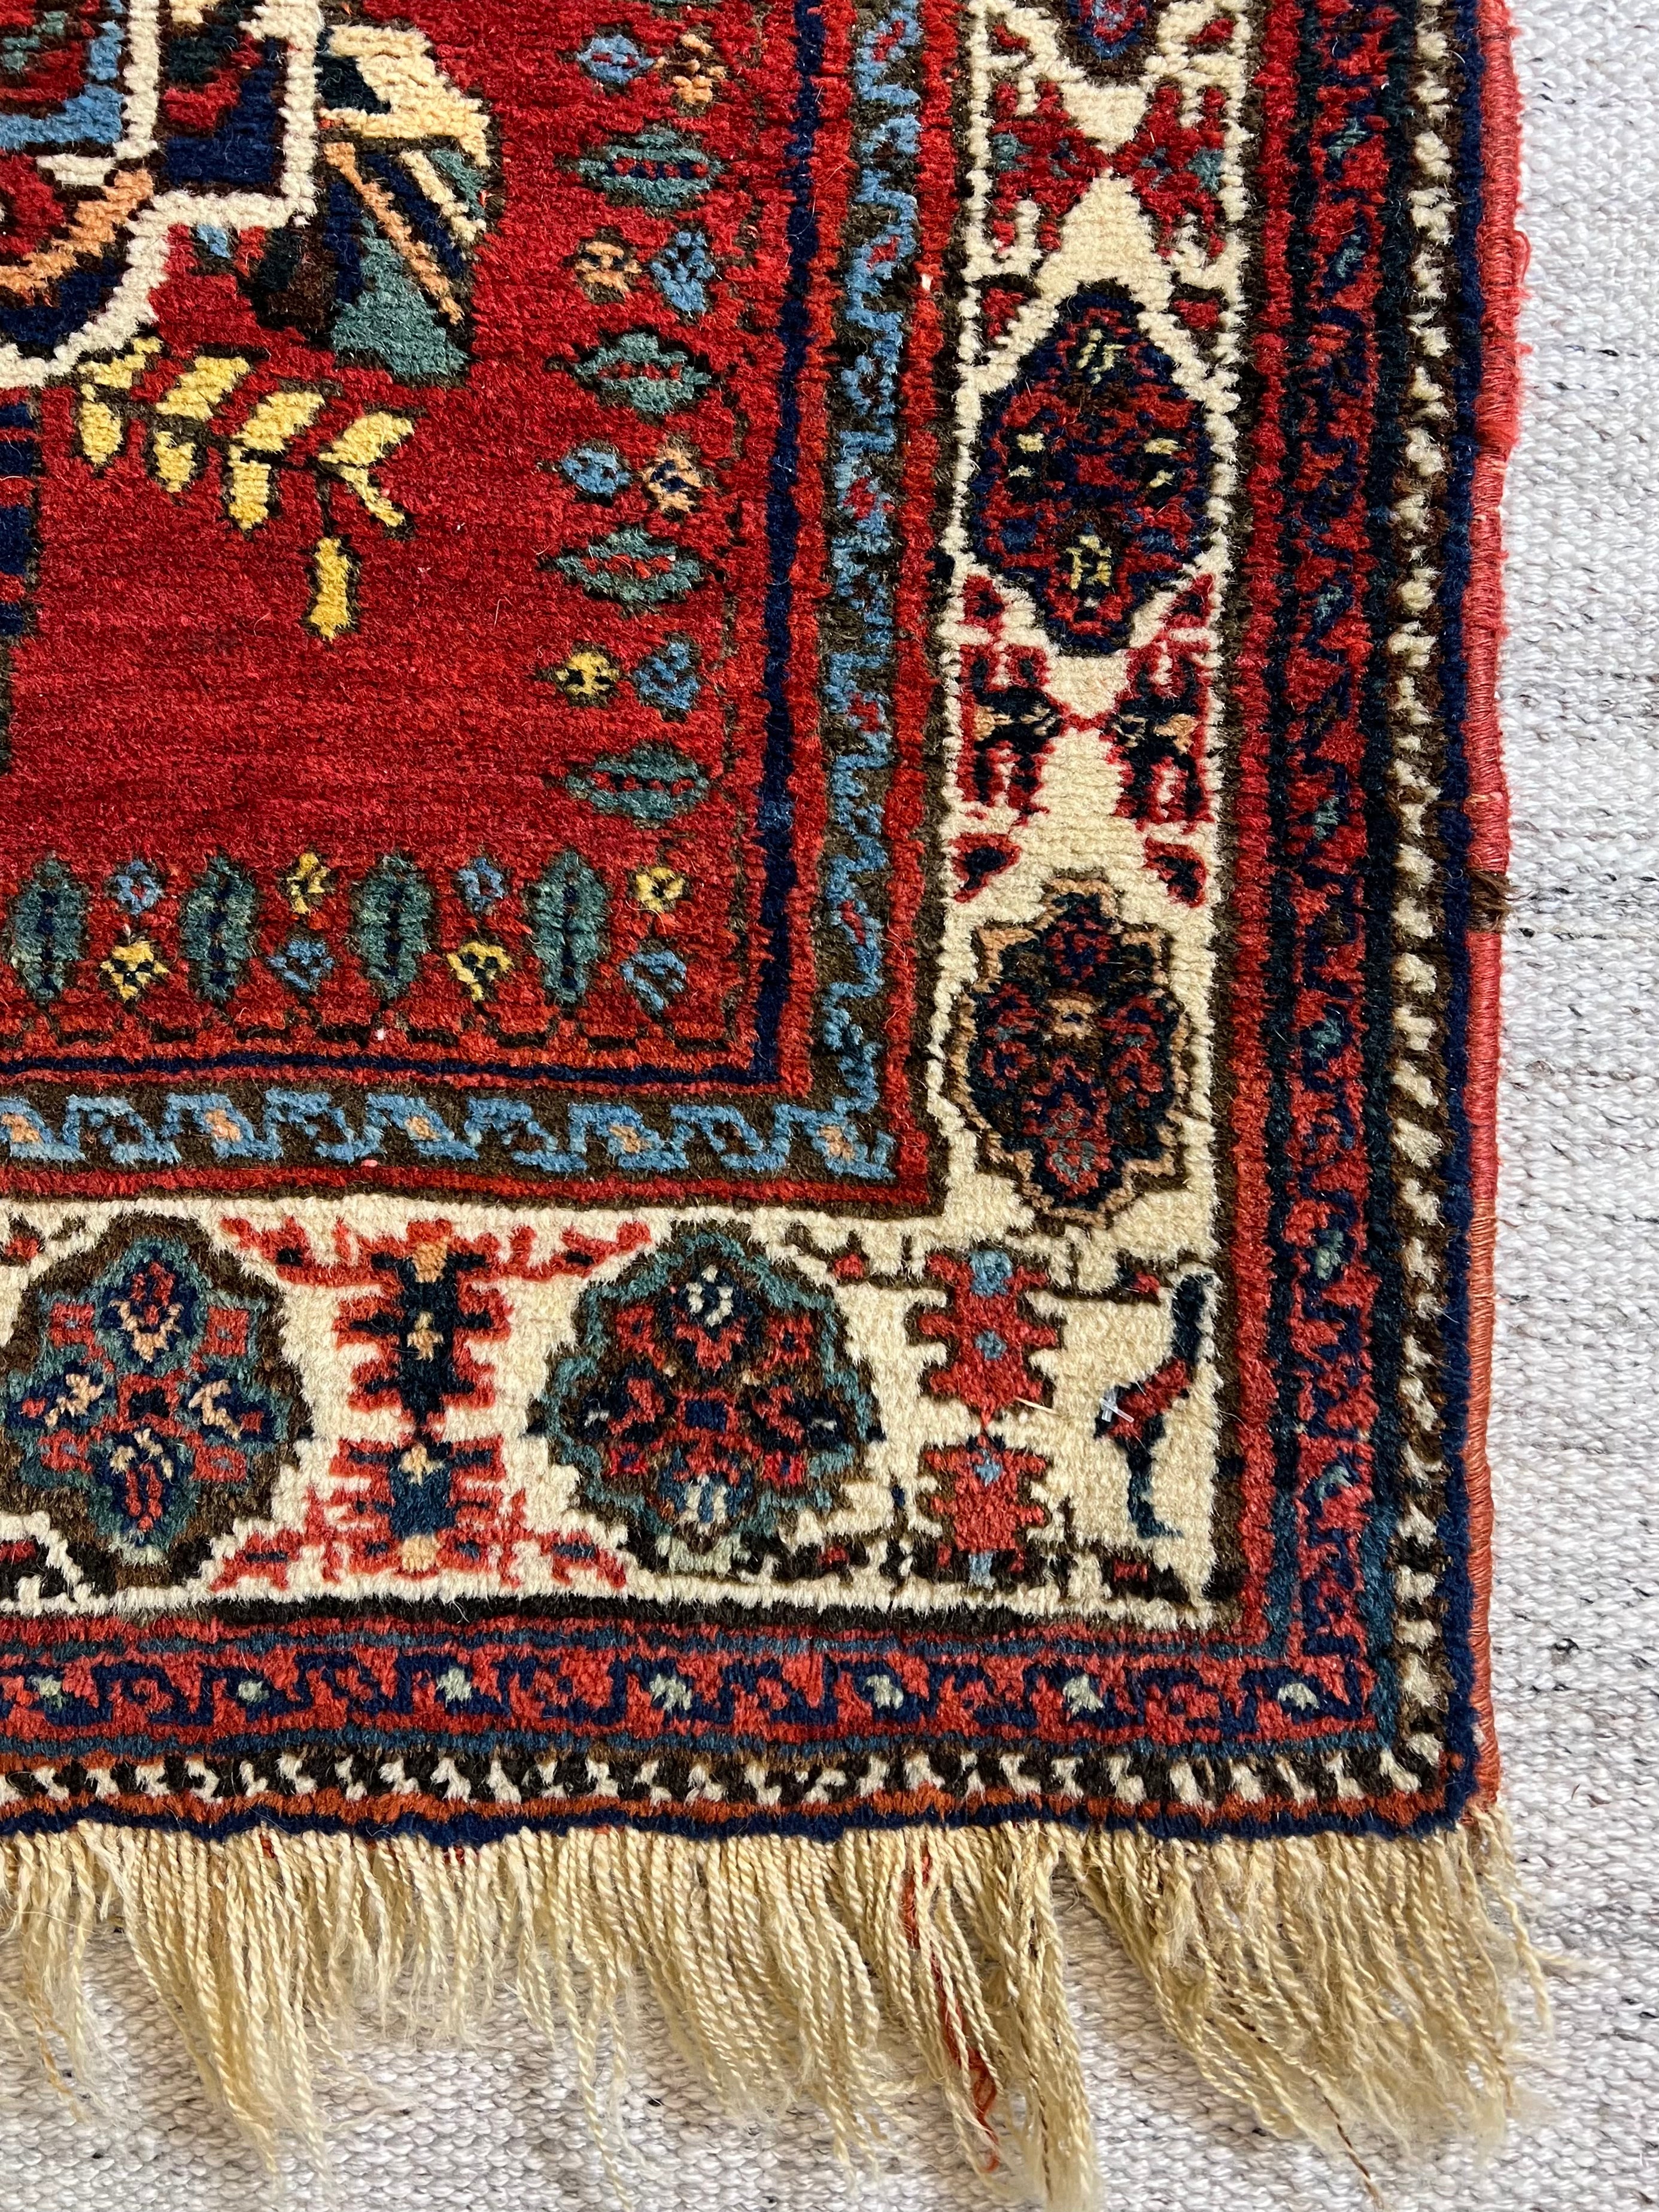 Antique Afshar 3.5x4.1 Red and Green